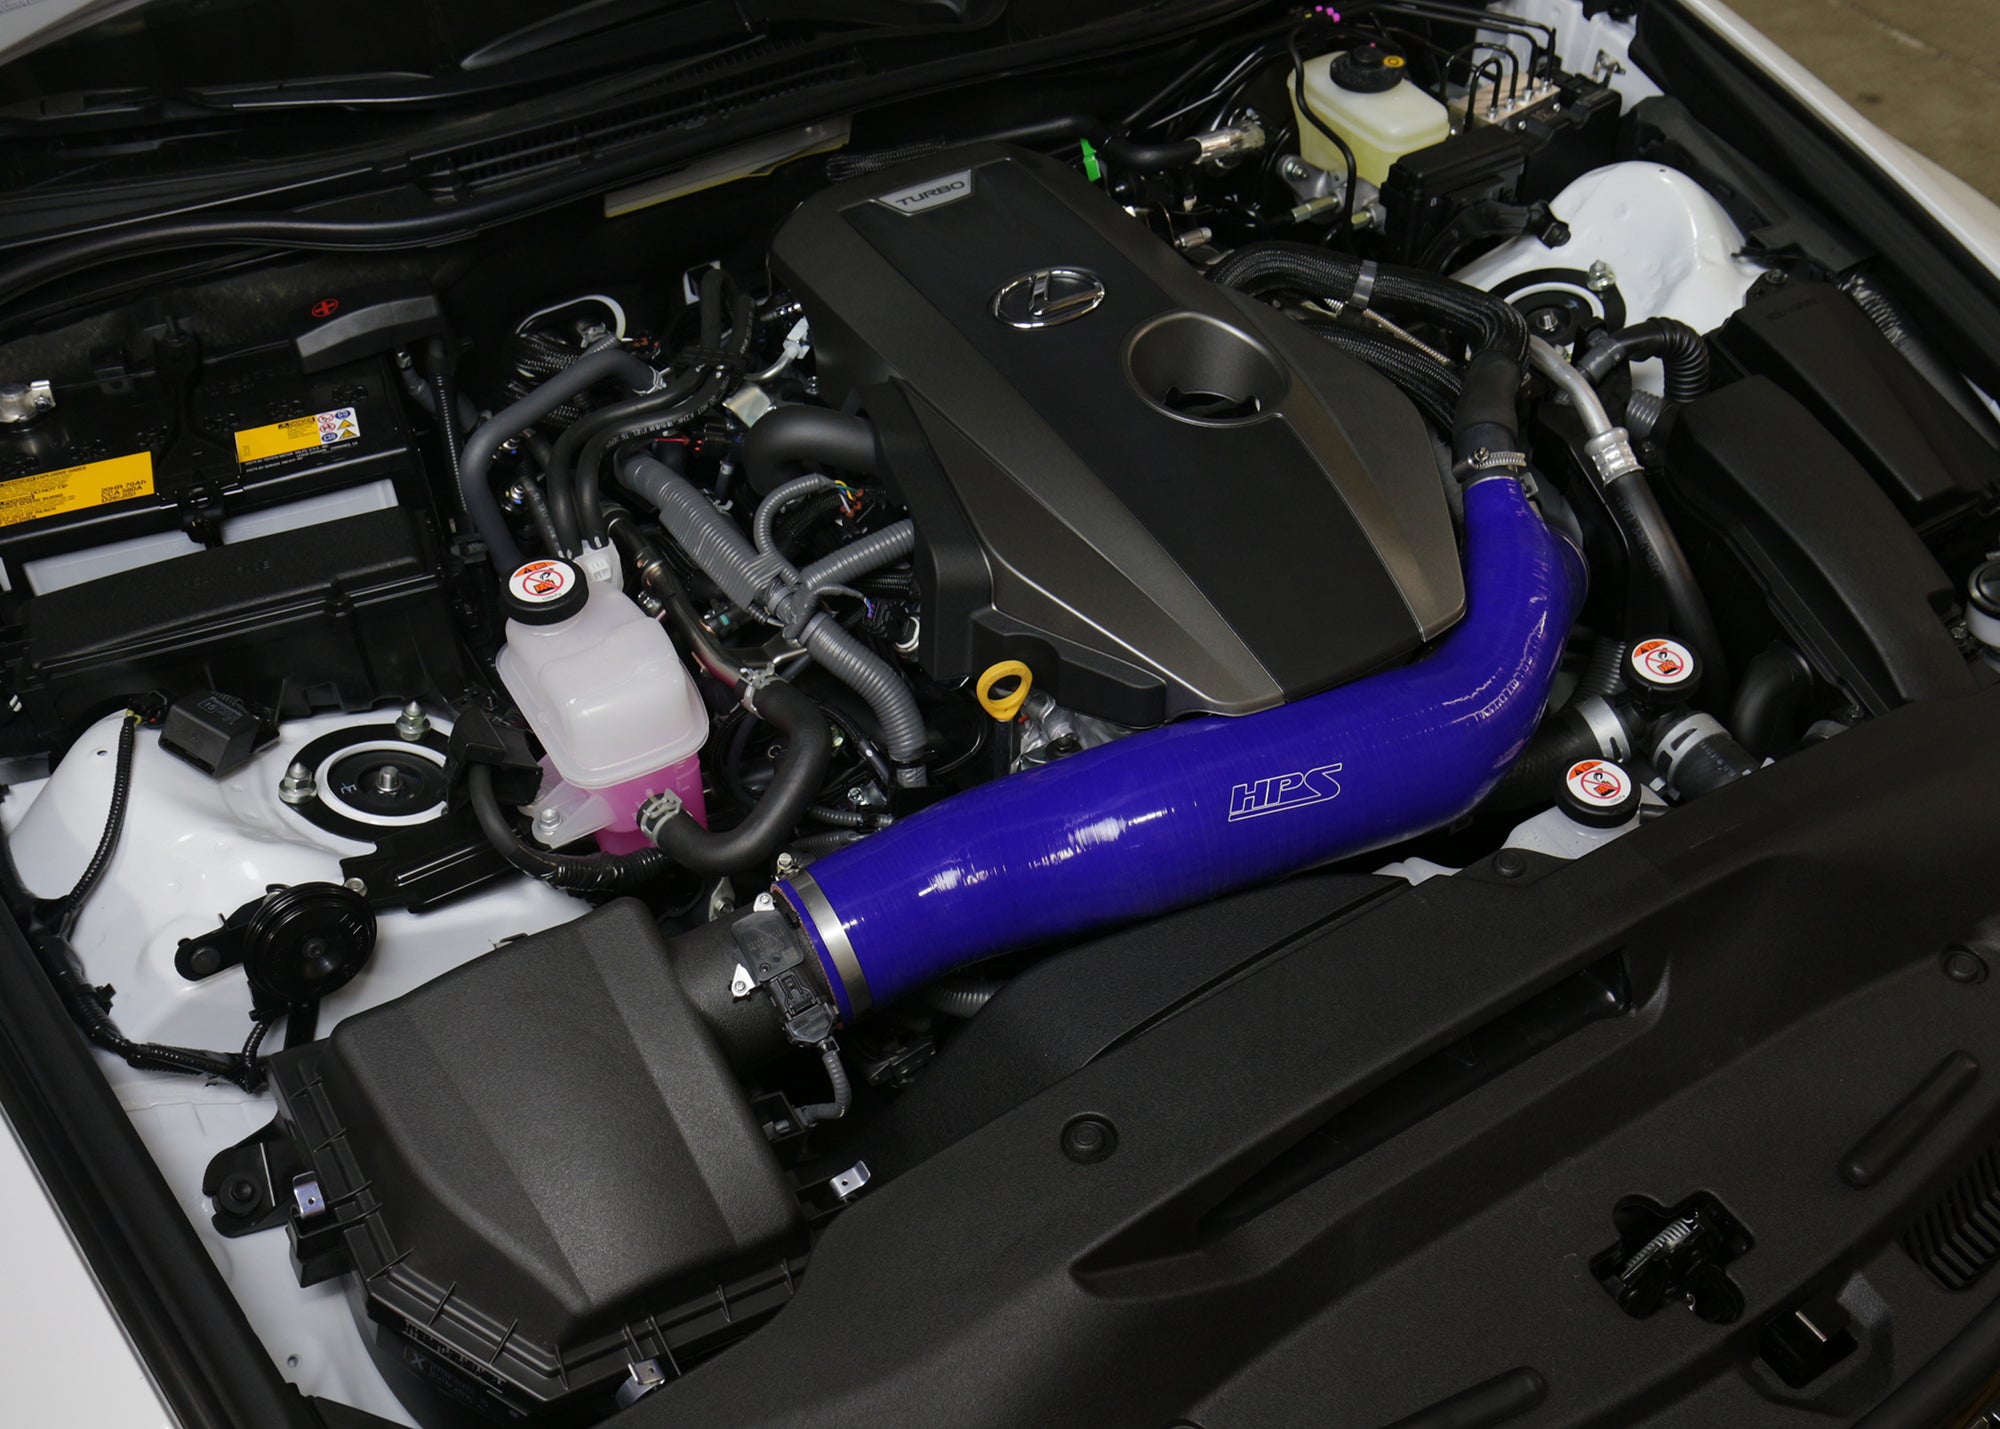 HPS Blue Reinforced Silicone Post MAF Air Intake Hose Kit Lexus 2018 IS300 2.0L Turbo 57-1585-BLUE Installed